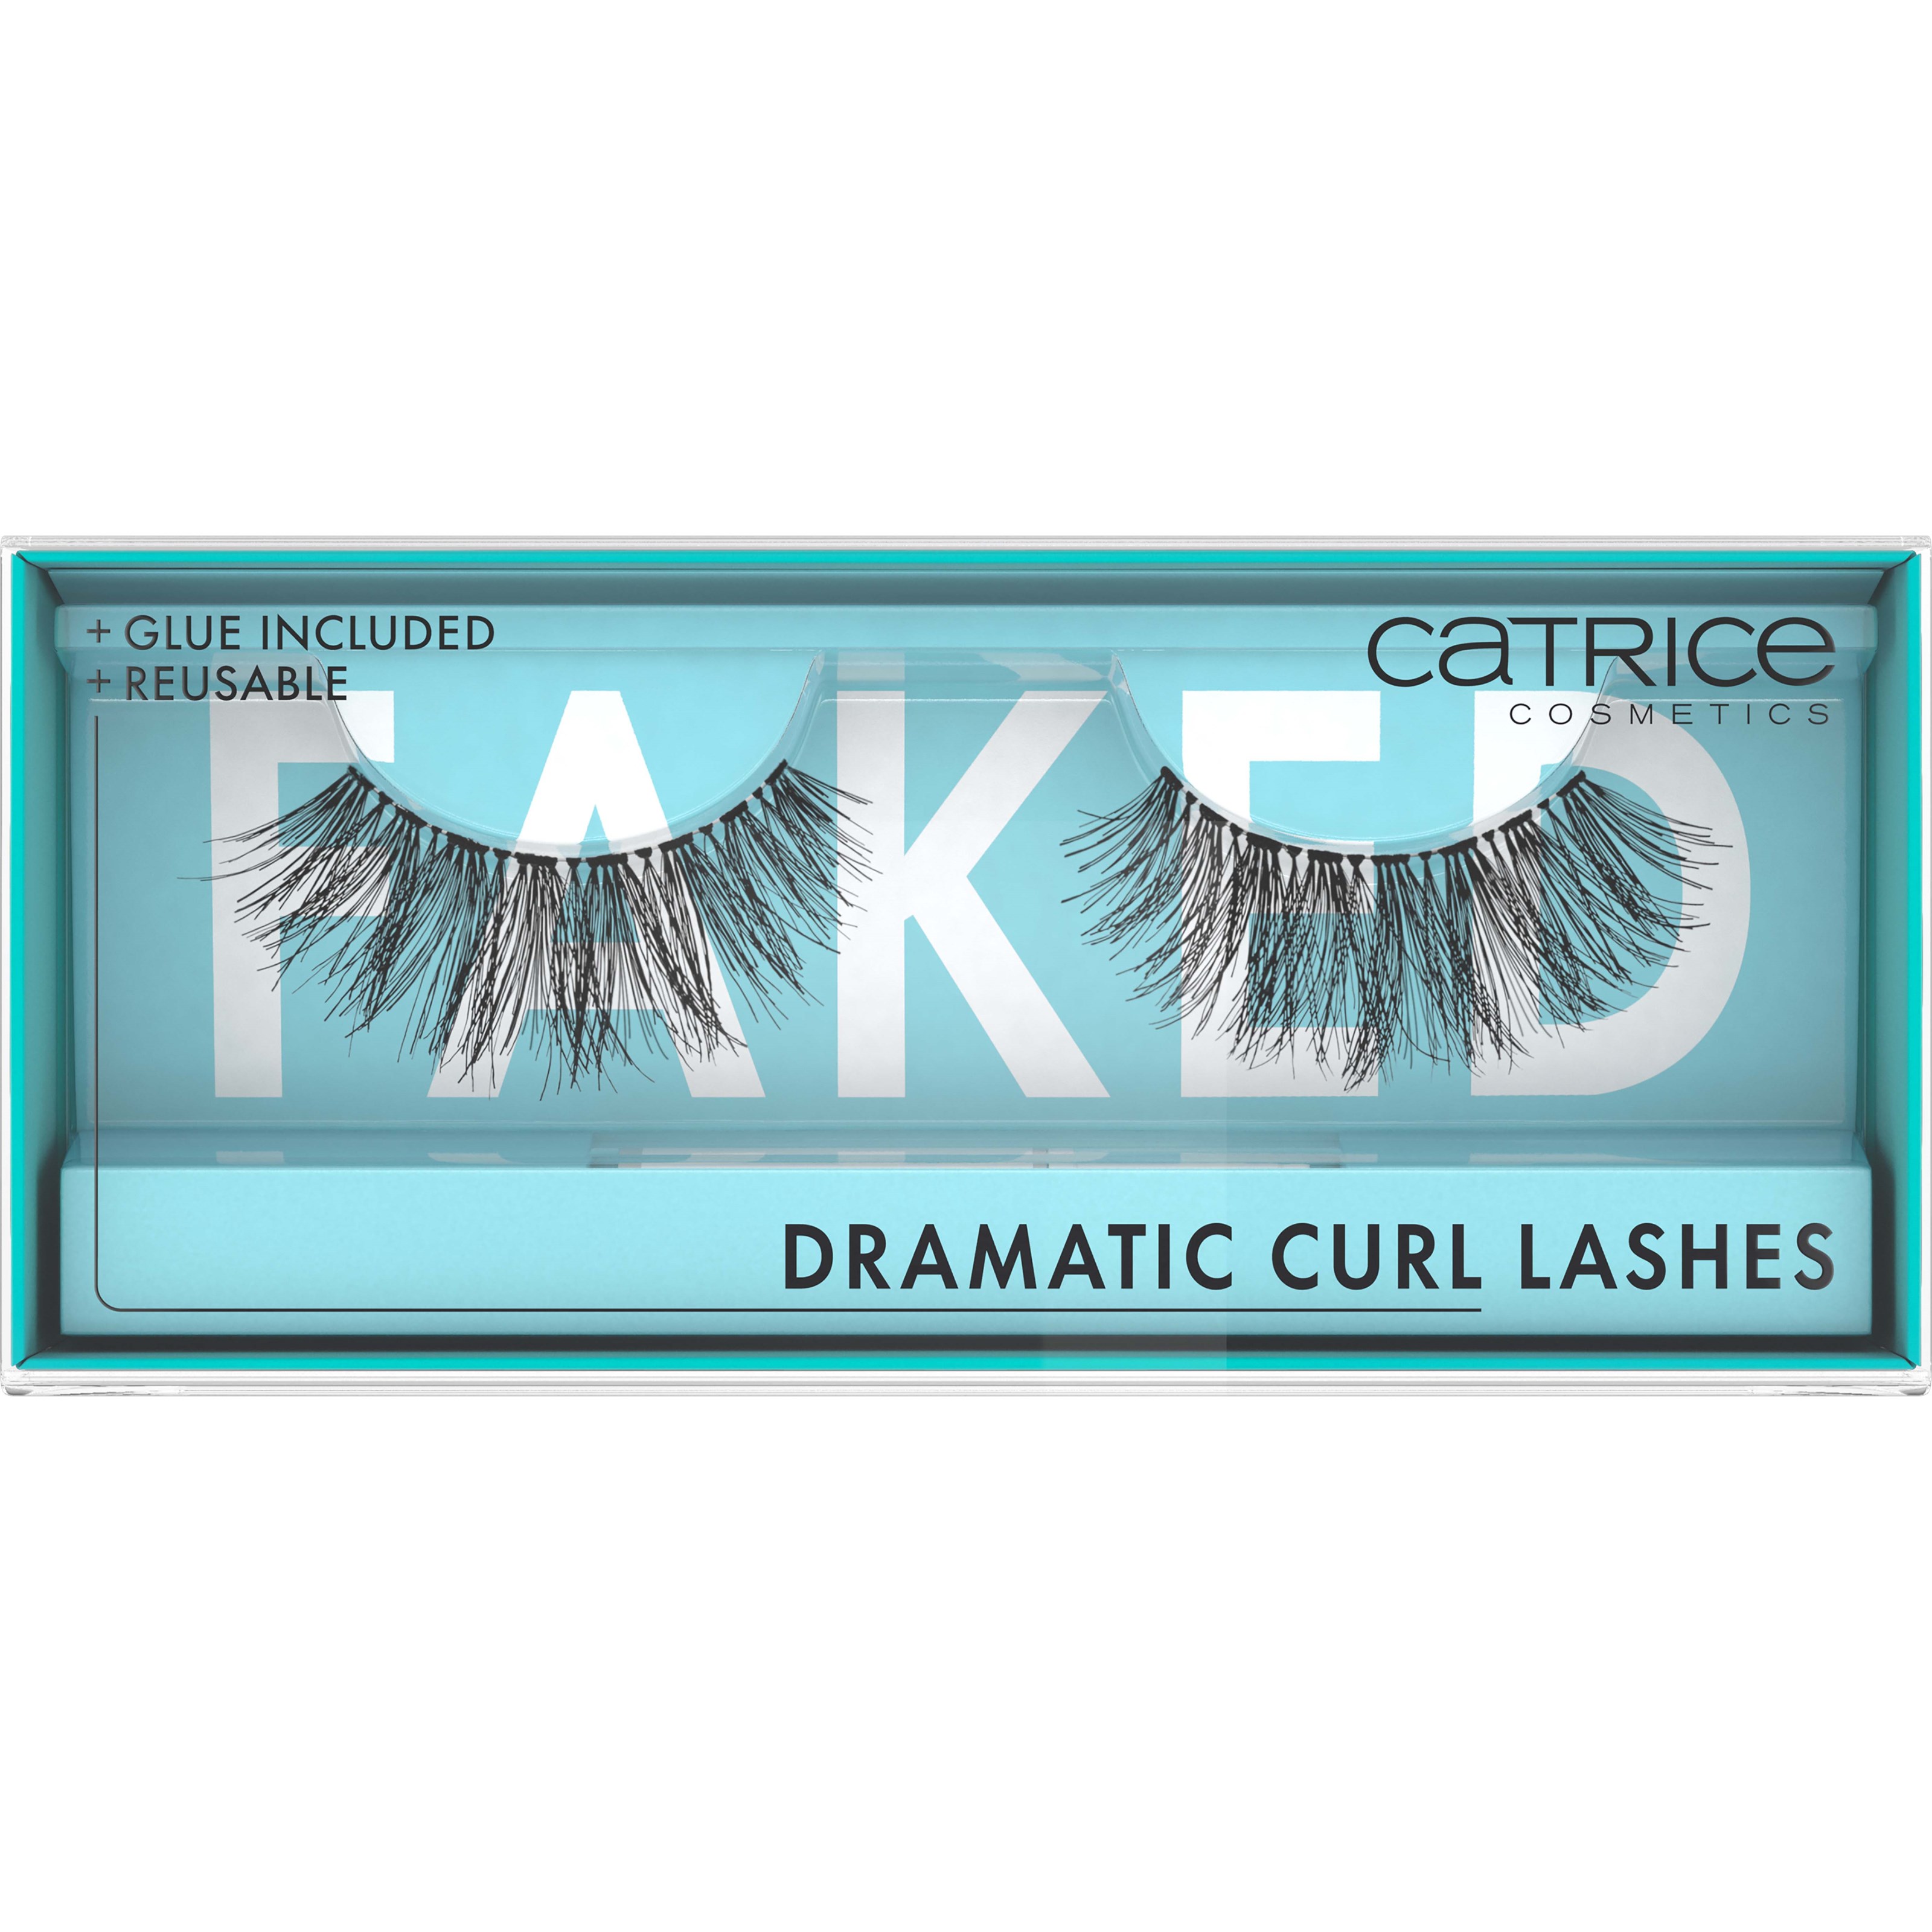 Läs mer om Catrice Faked Dramatic Curl Lashes